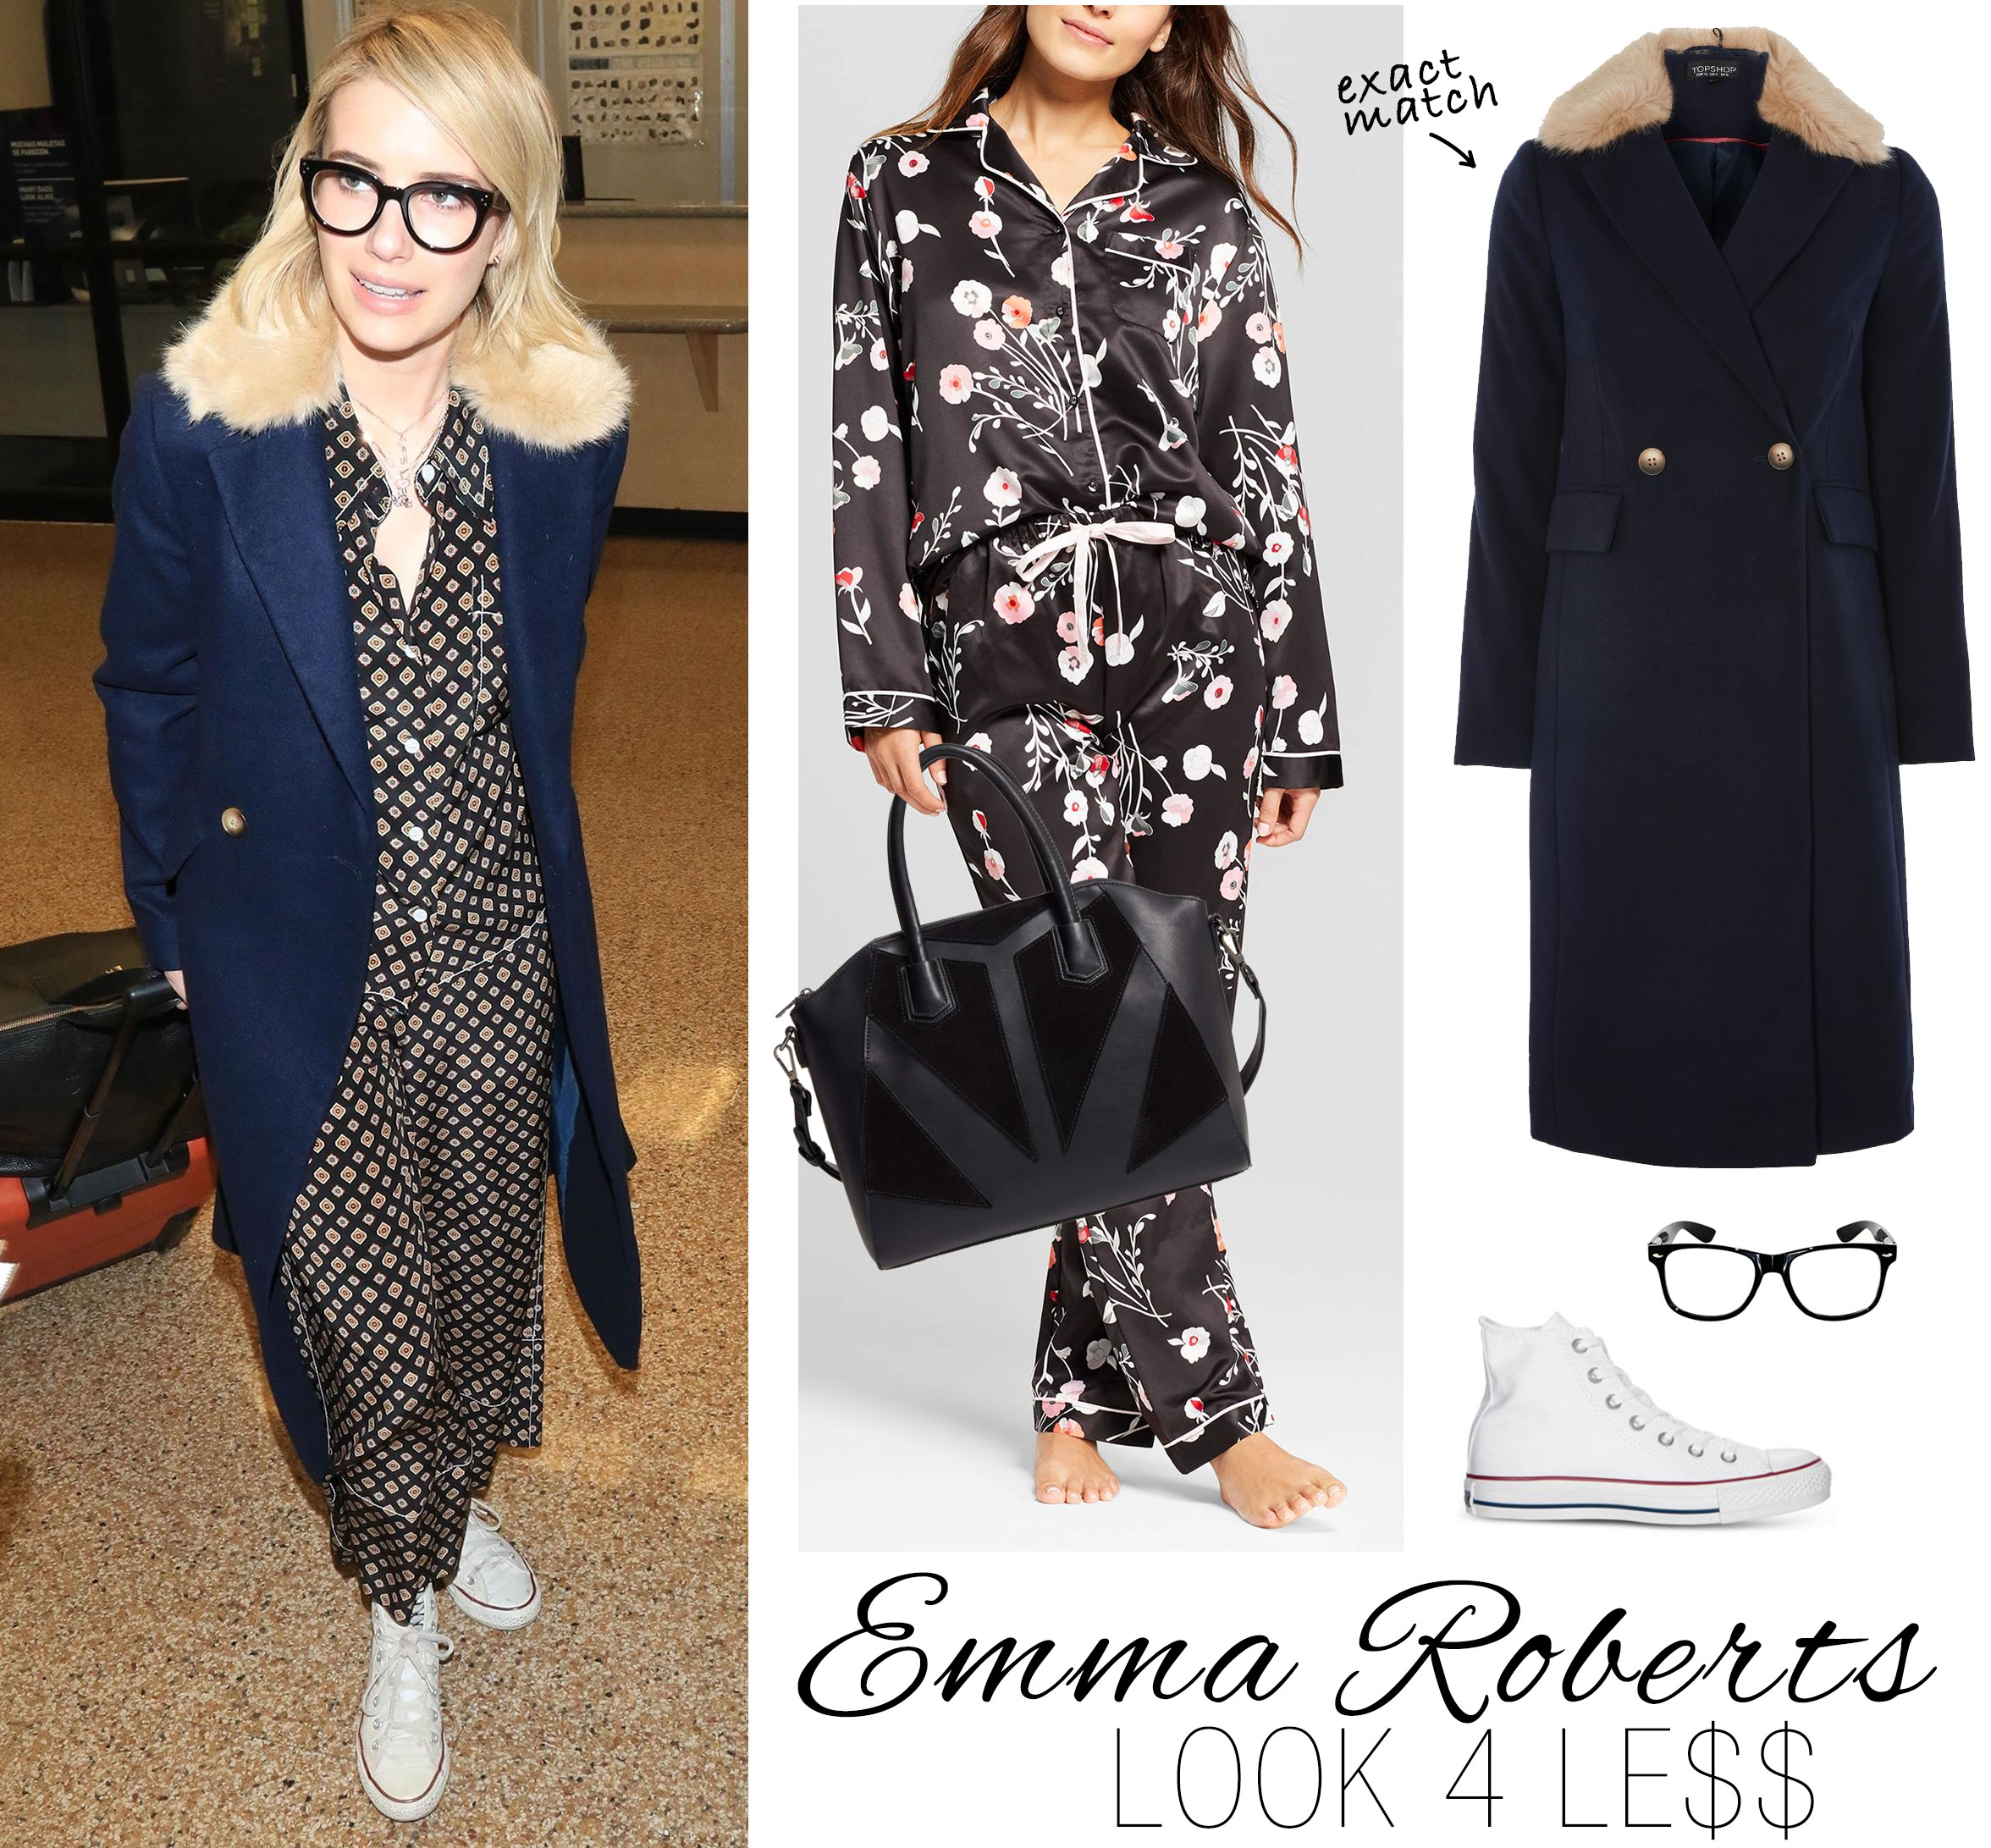 Emma Roberts wears Topshop pajamas and coat with Converse sneakers and Celine geek glasses.